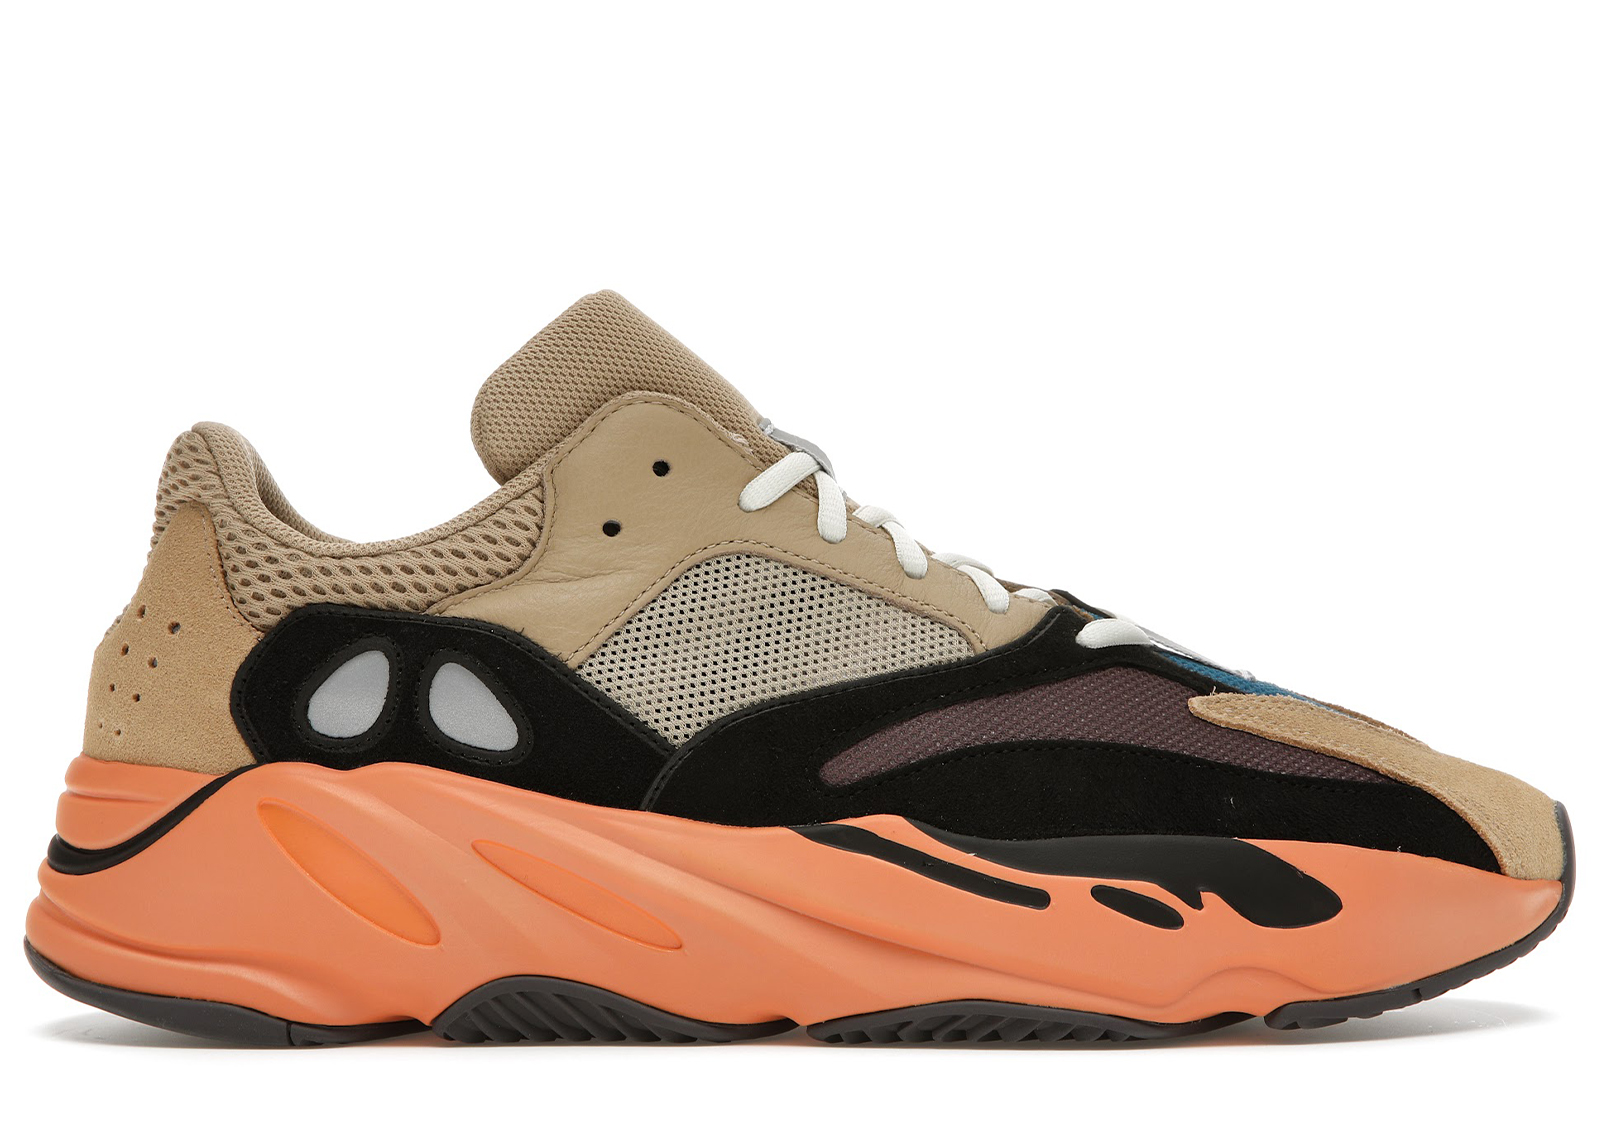 adidas Yeezy Boost 700 Enflame Amber - GW0297 - US